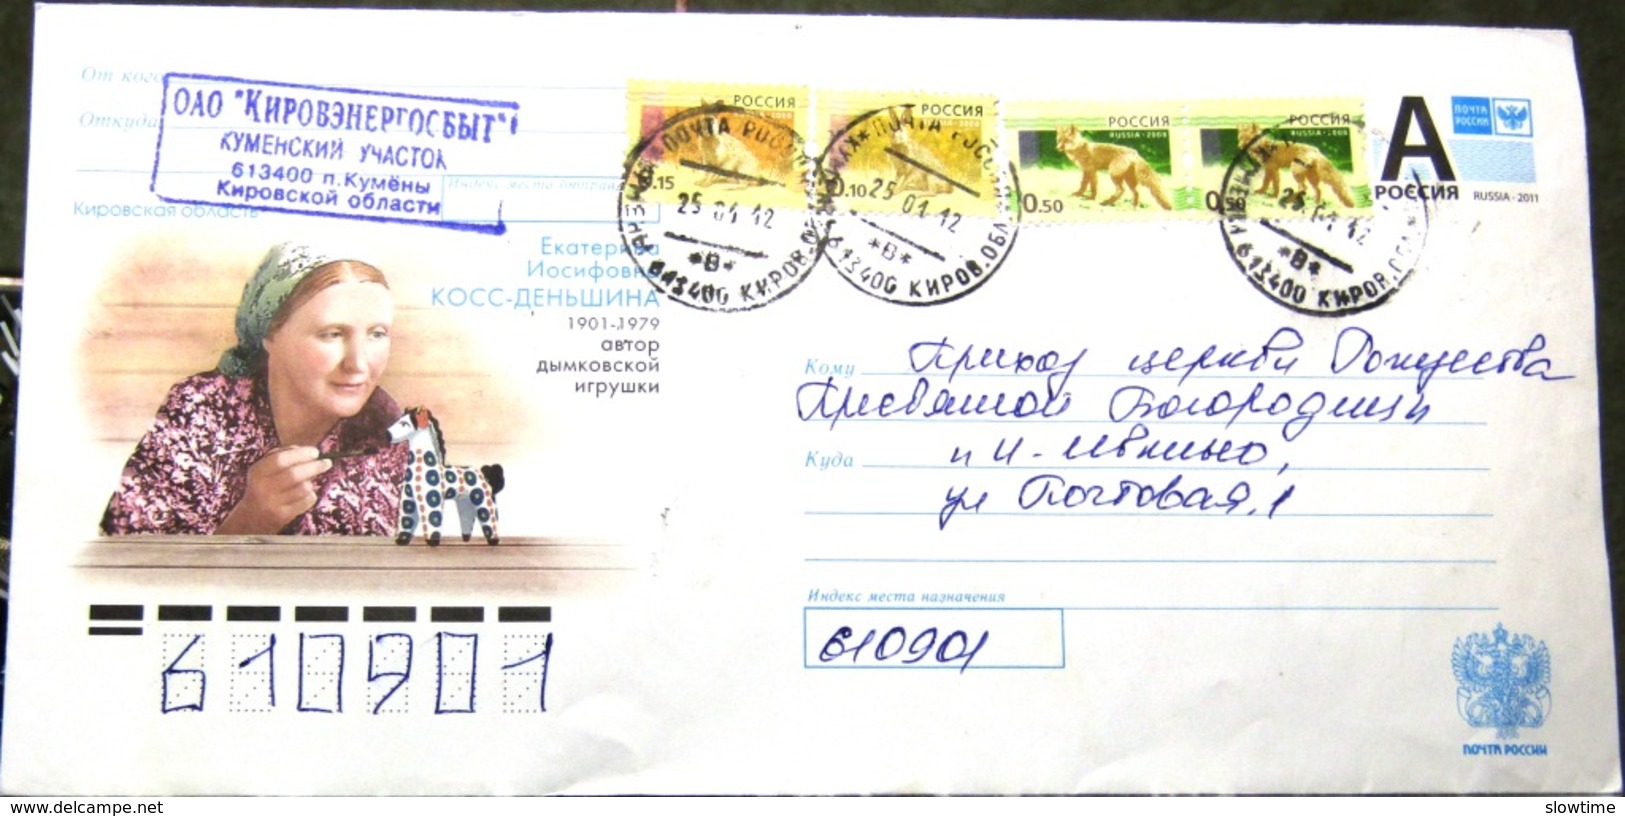 Posted Mail Post Cover Envelope Russia Ekaterina Ivanovna Koss-Denshina - Author Of Dymkovo Toys 2011 - Covers & Documents